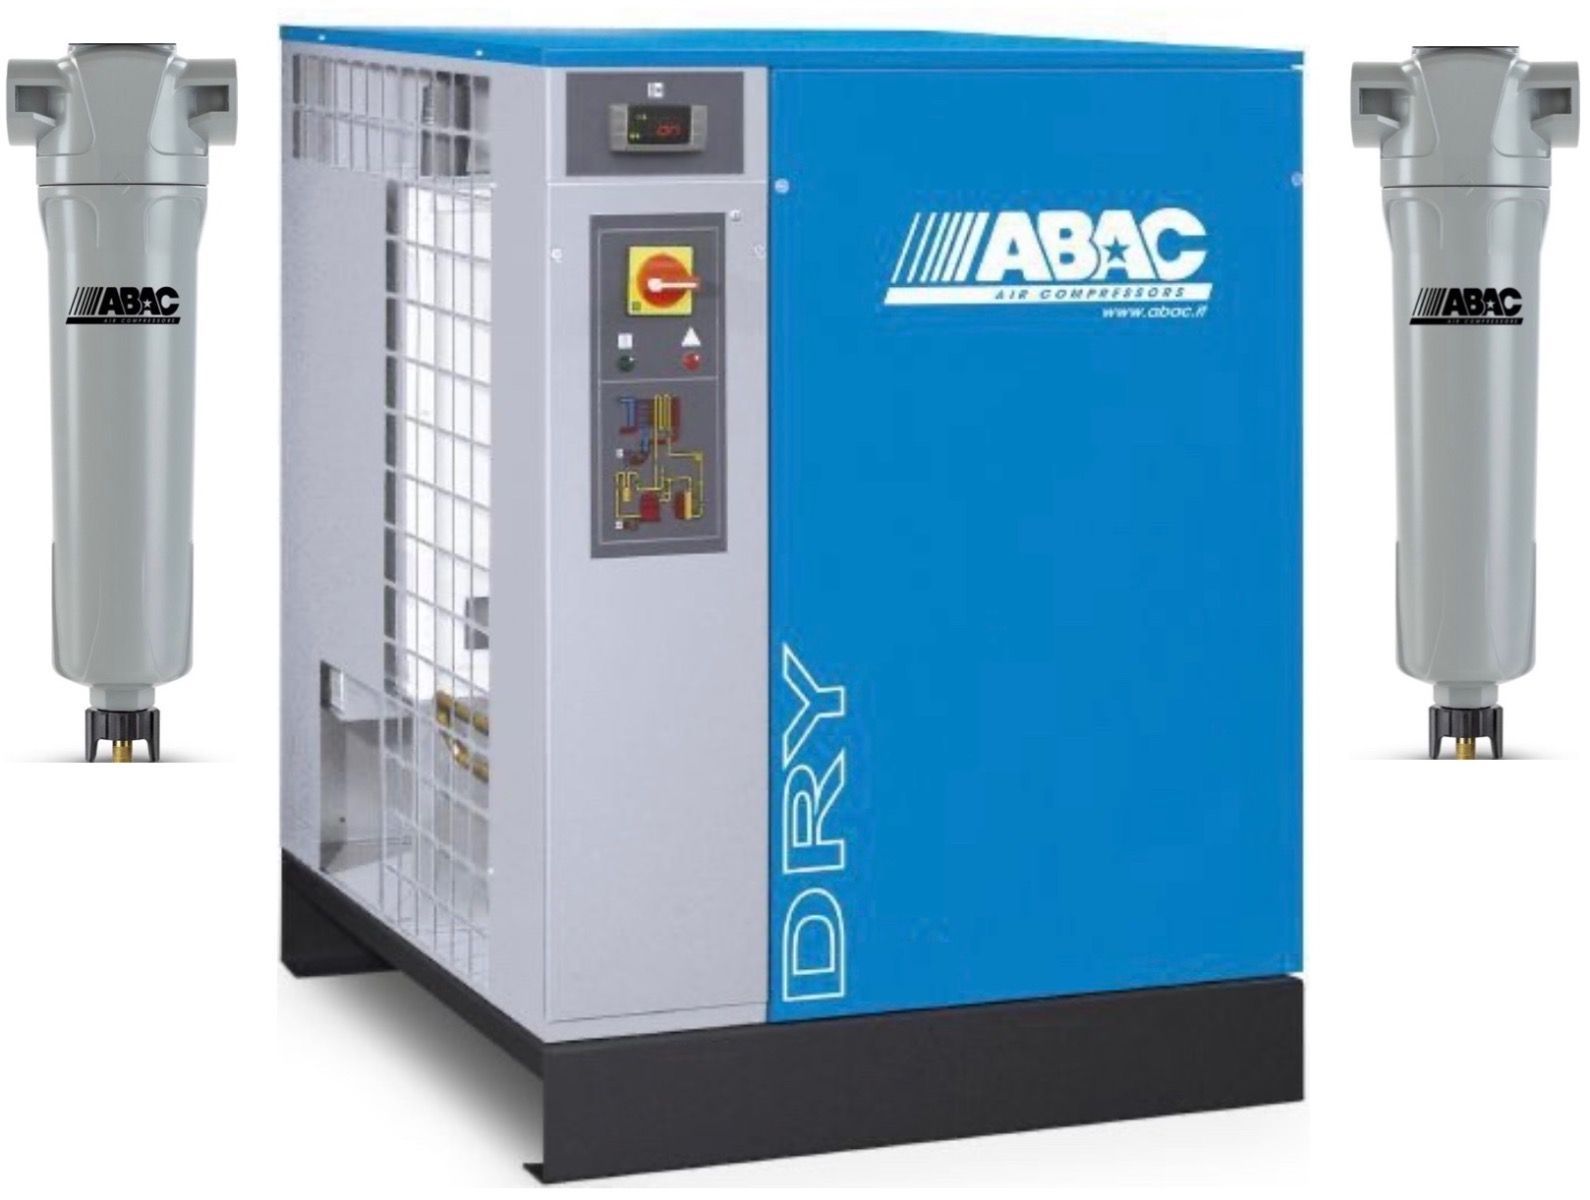 Abac DRY 830 530 cfm Compressed Air Dryer & Filters